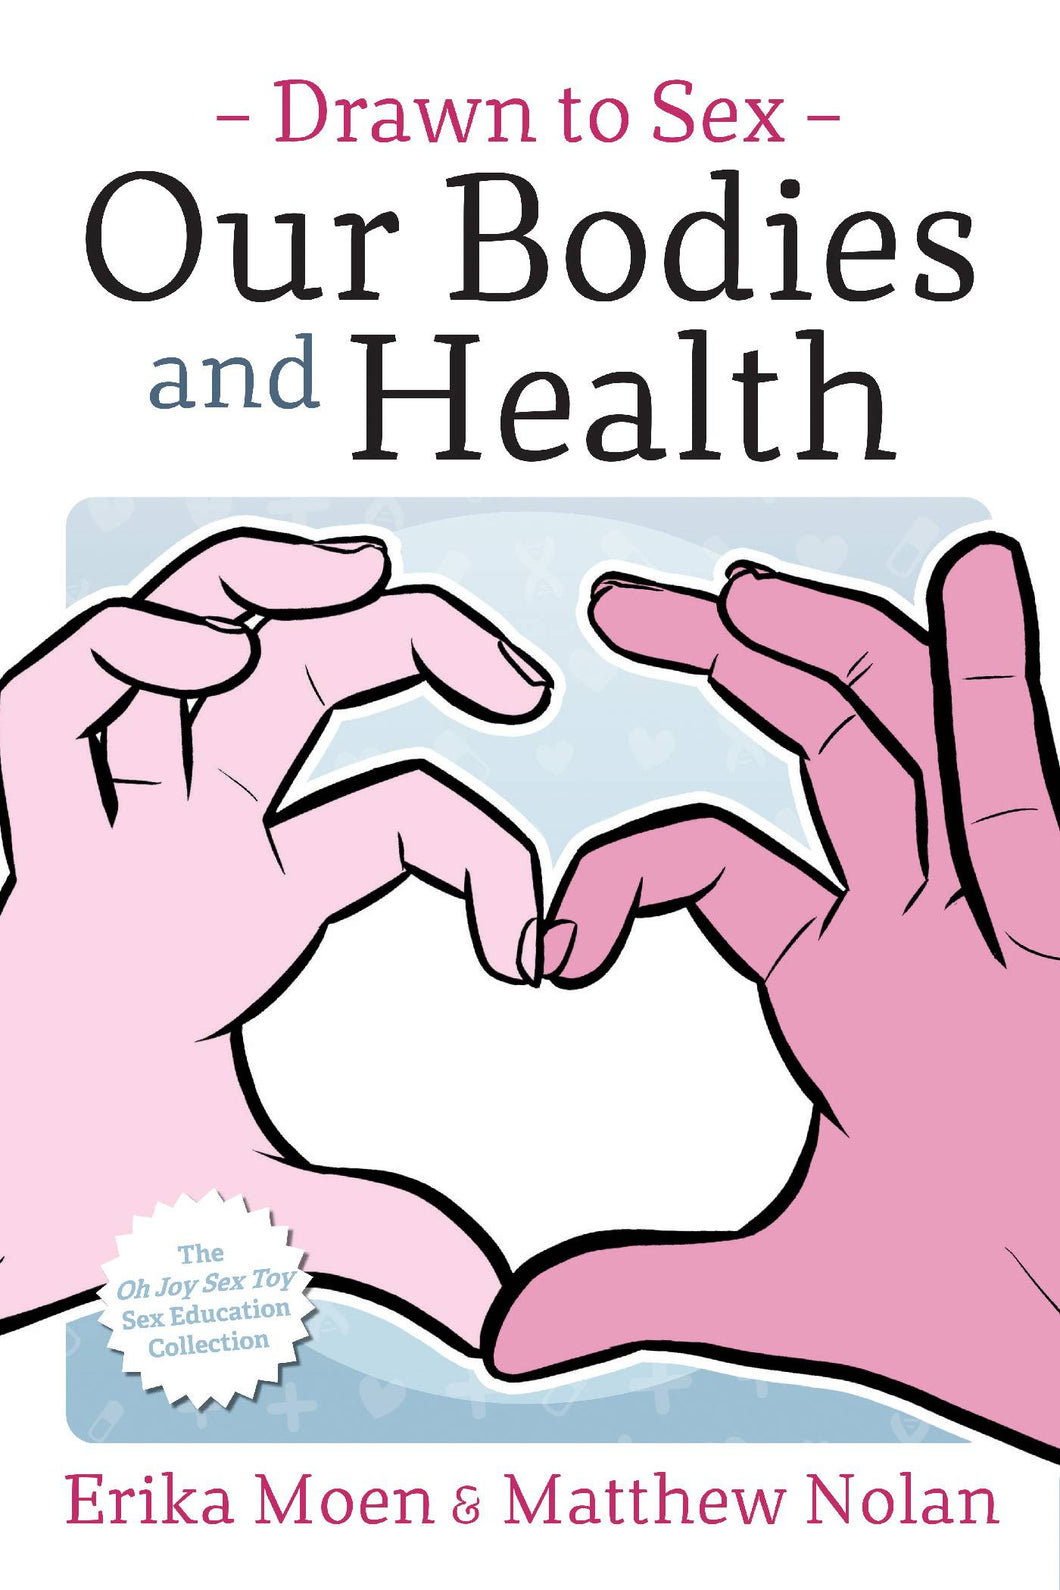 Drawn to Sex GN Vol 02 Our Bodies and Health - Books